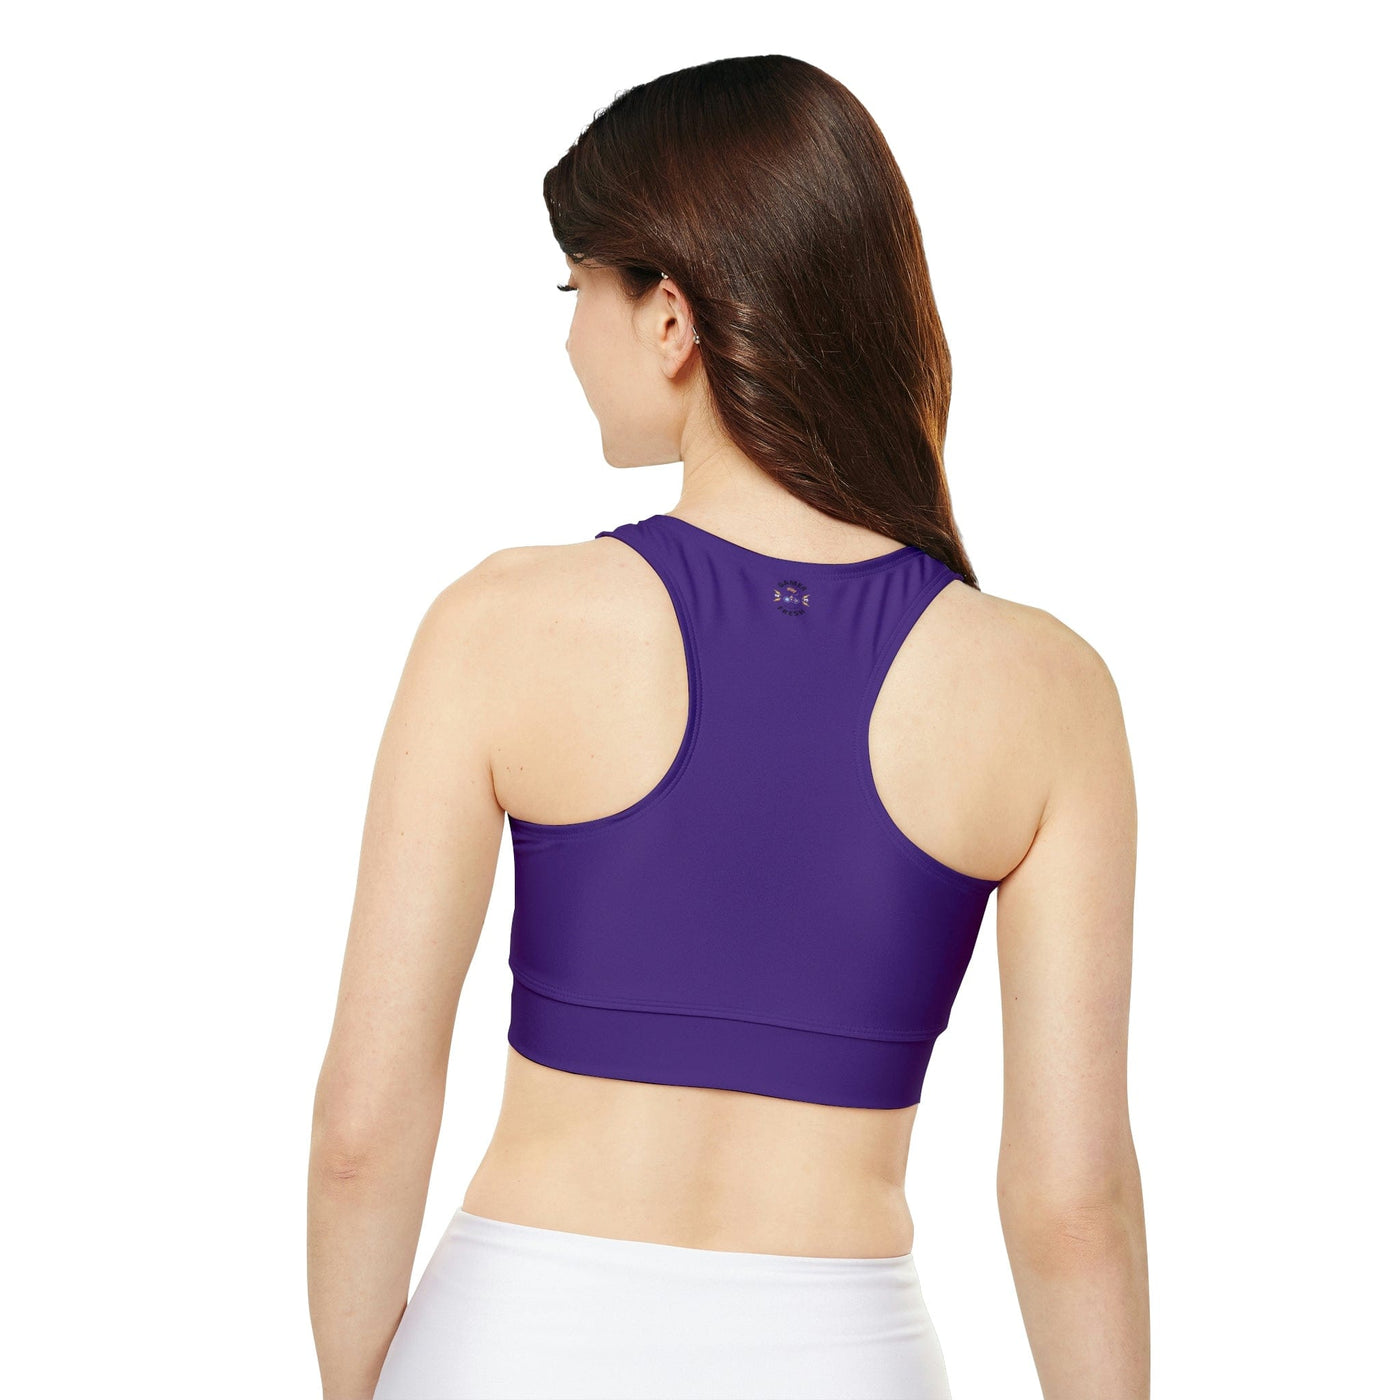 Gamer Fresh Limited Edition | Qahwah Pop | Fully Lined Padded Ladies Purple Sports Bra